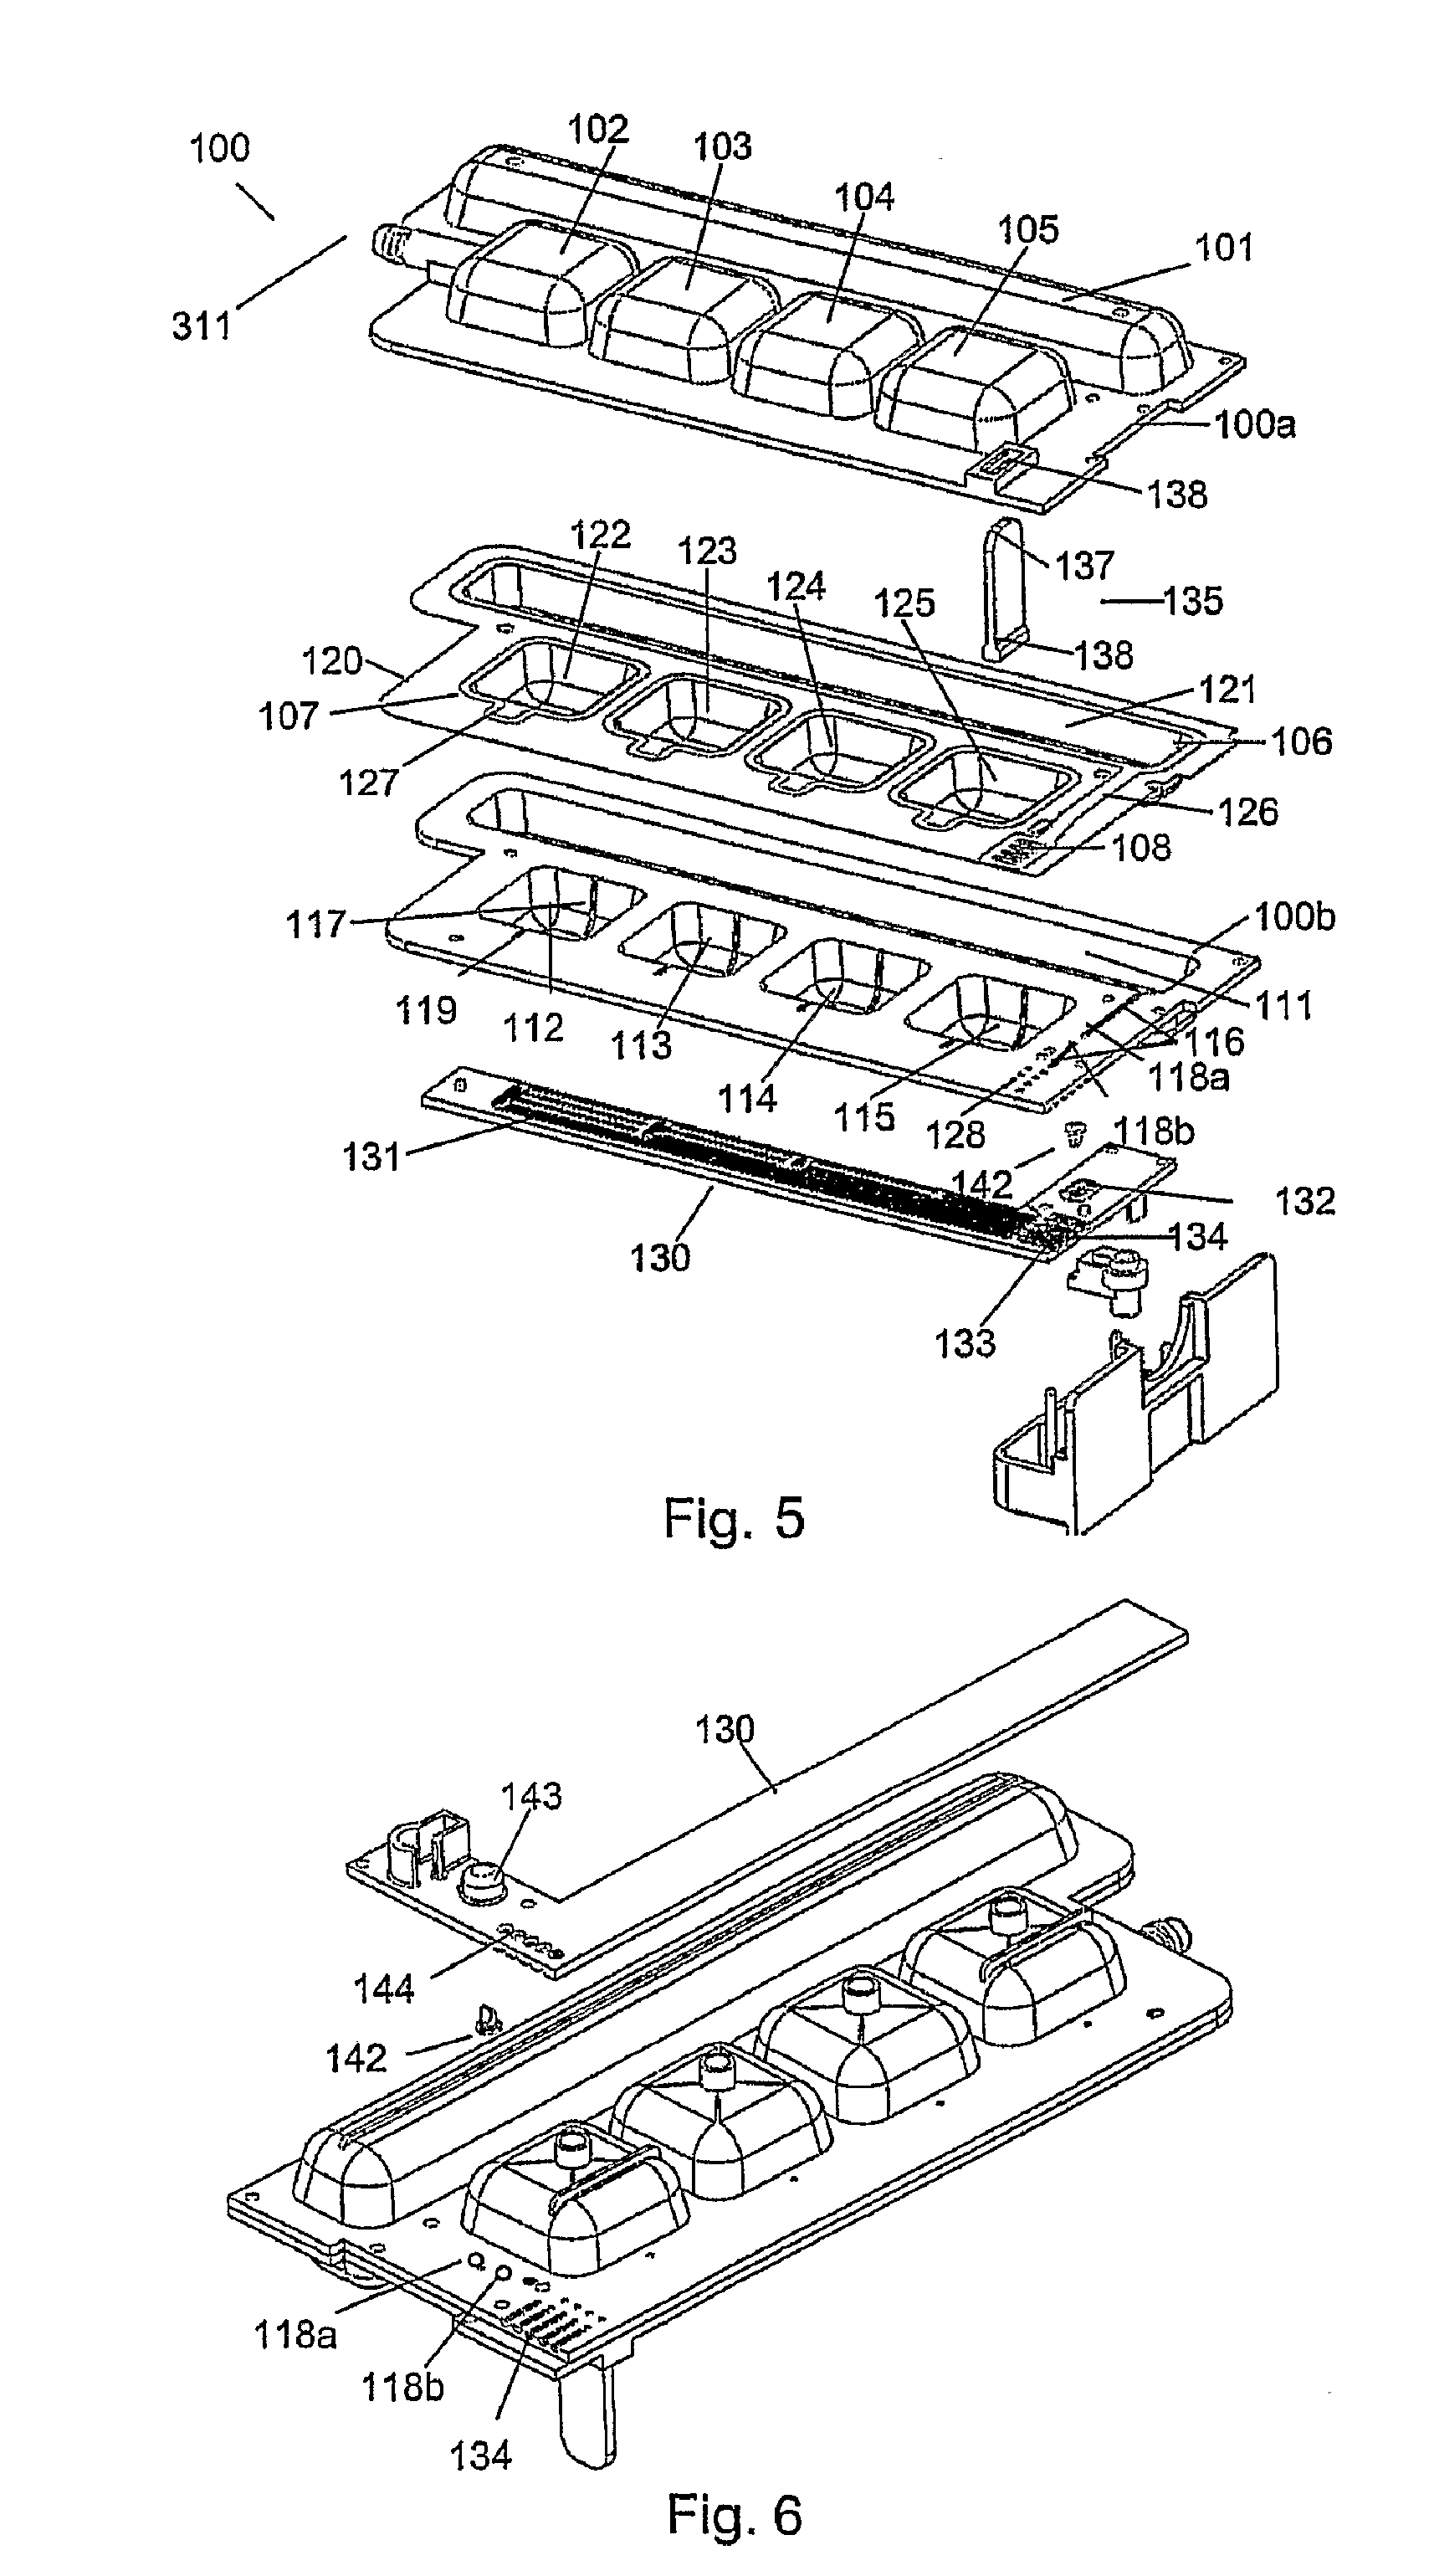 Analysis system with a remote analysing unit